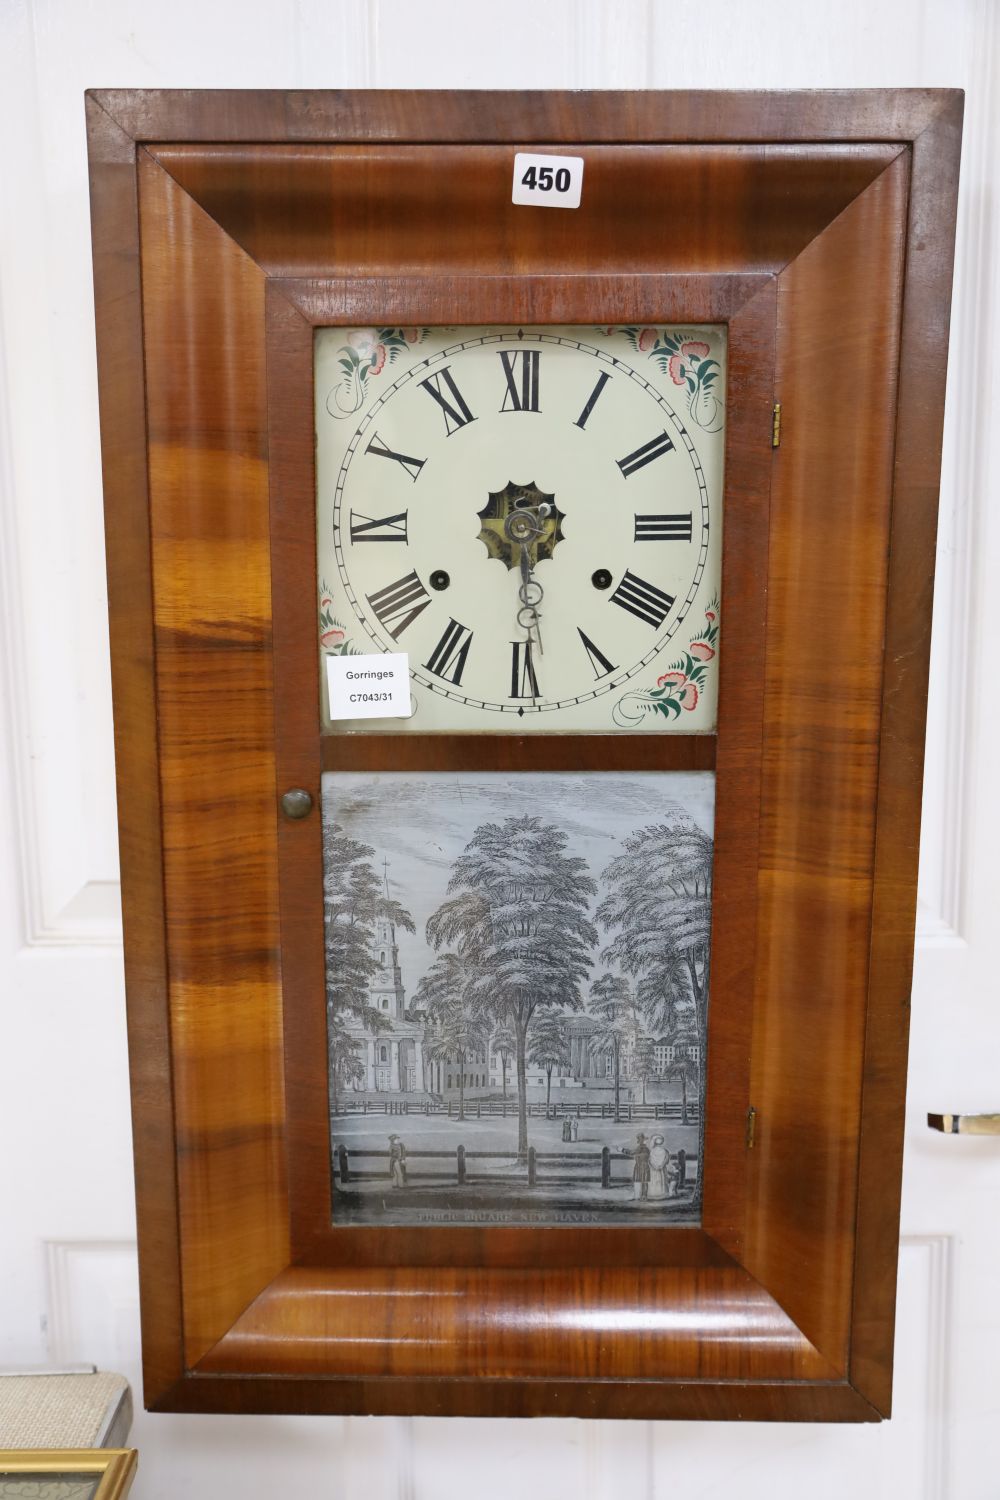 A mid 19th century American wall clock by Seth Thomas, Plymouth Hollow, Connecticut, in walnut veneered case, 66cm